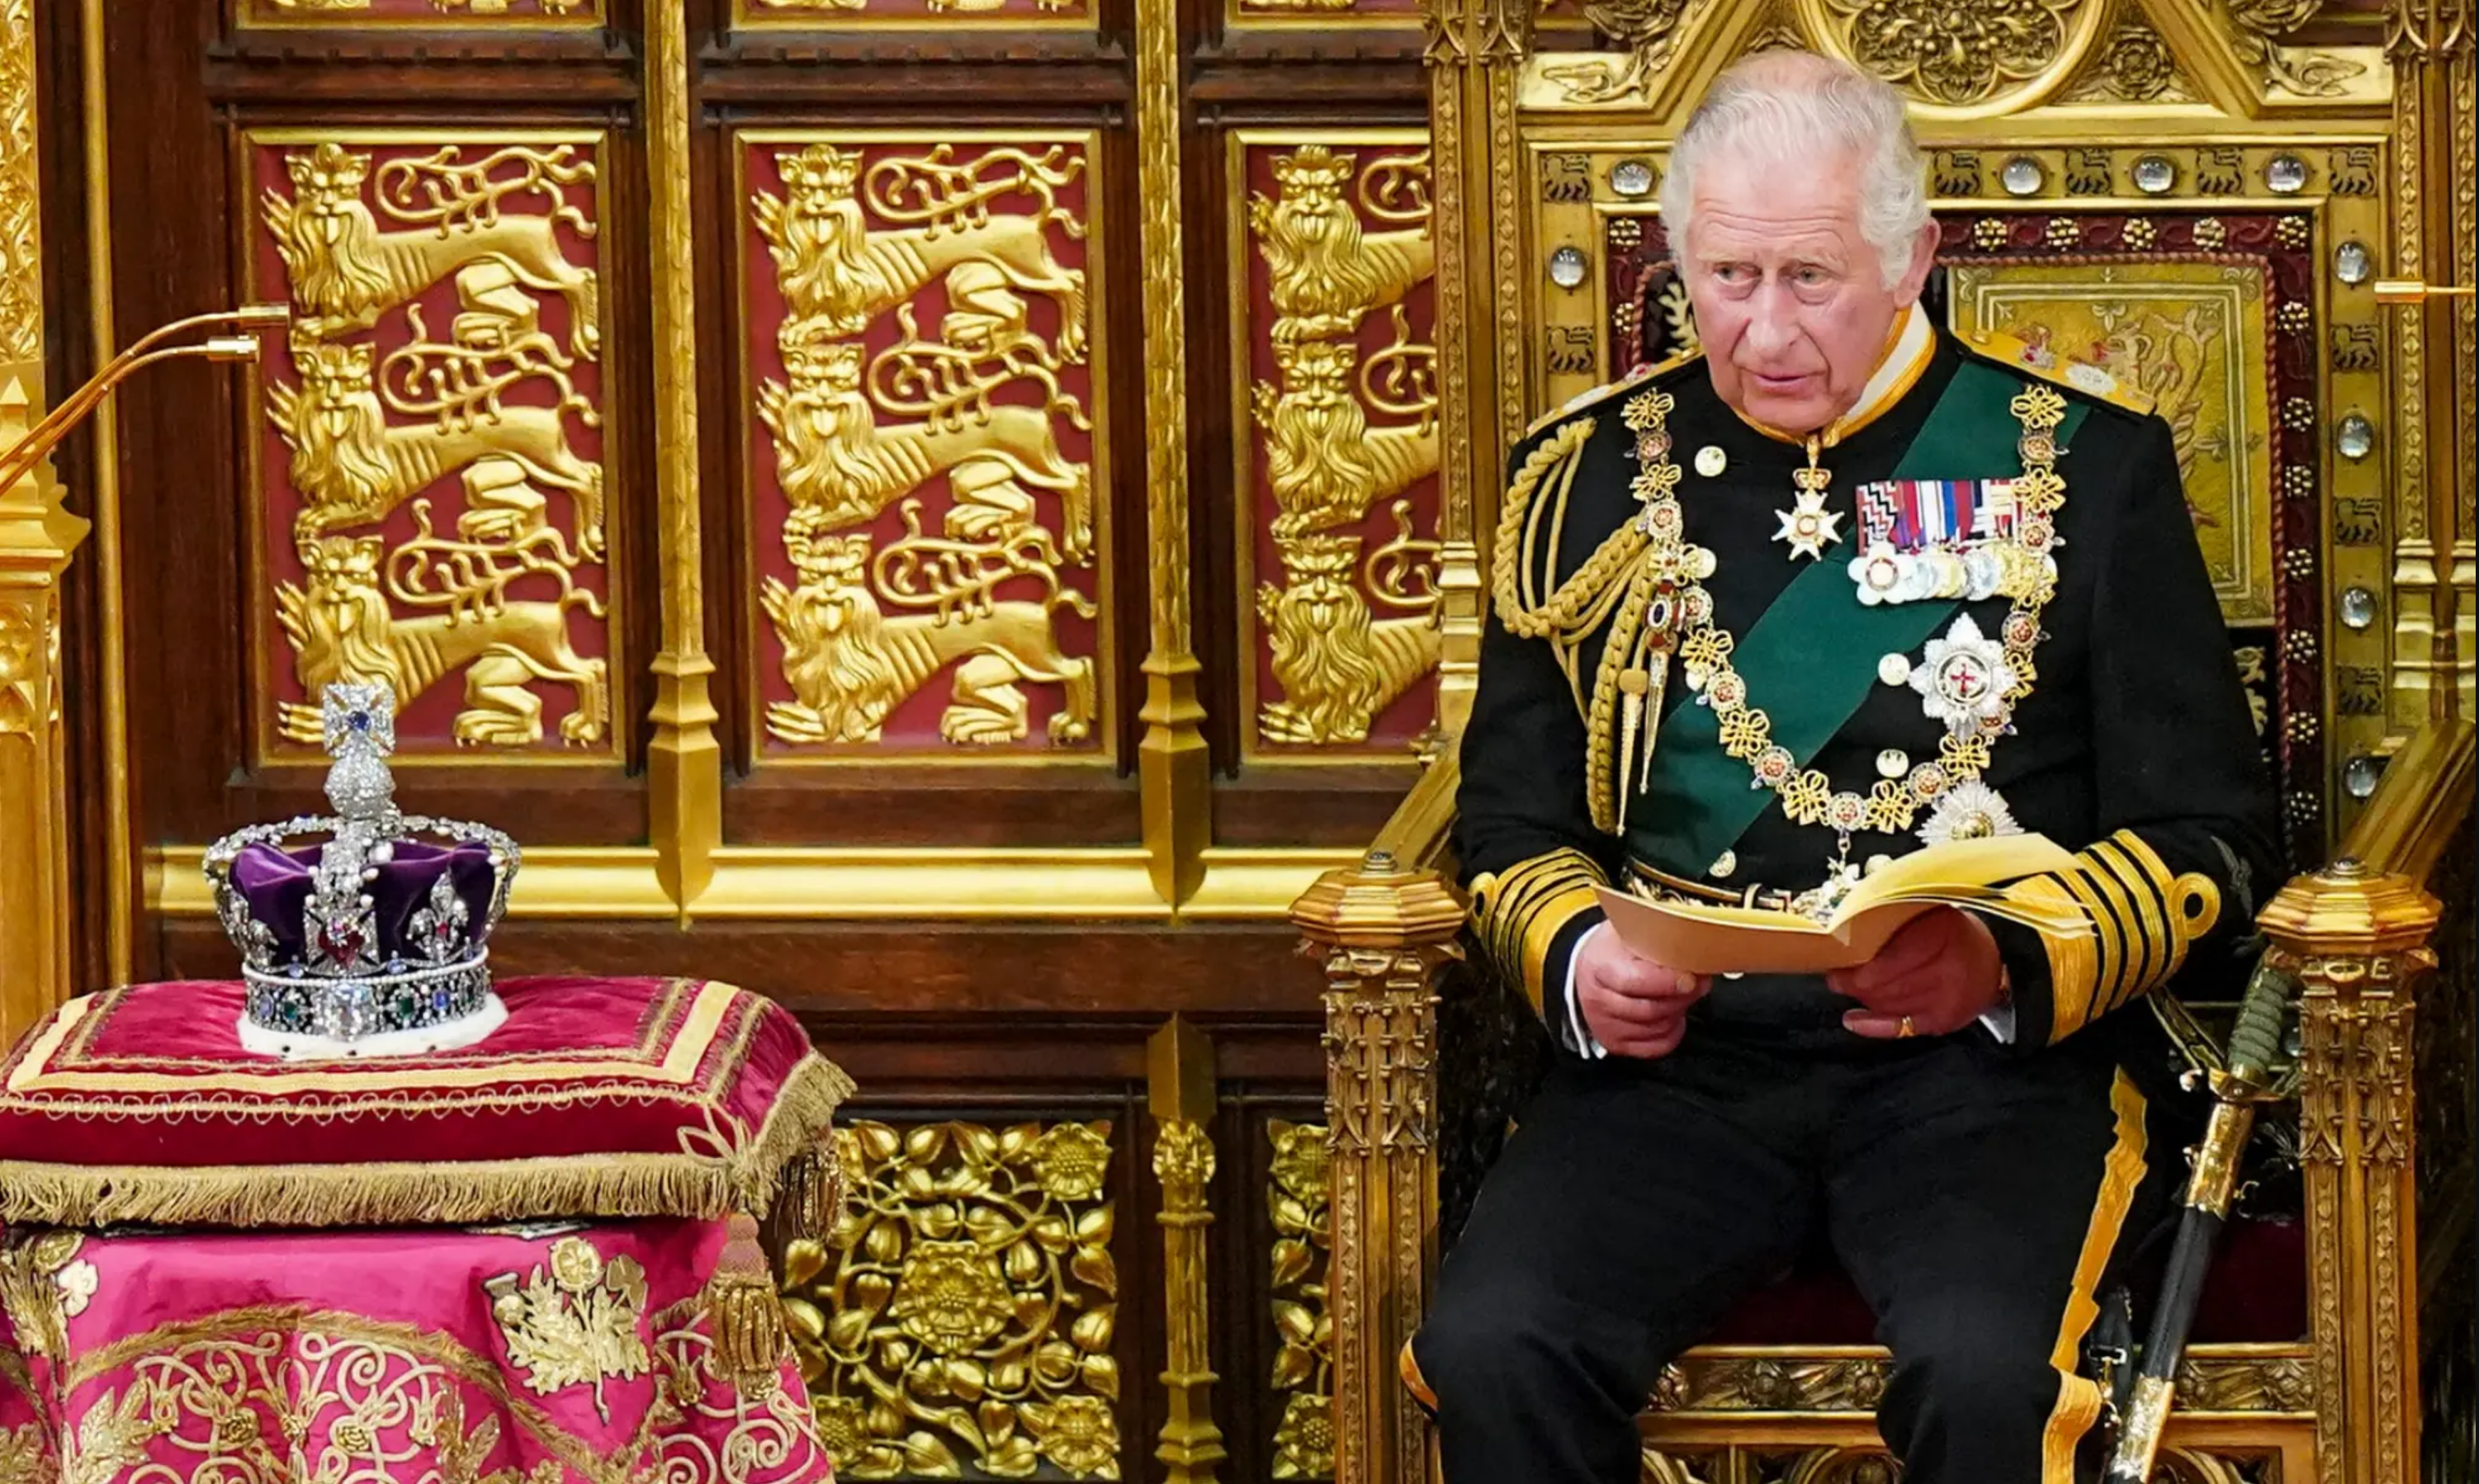 Charles sat on a throne of gold